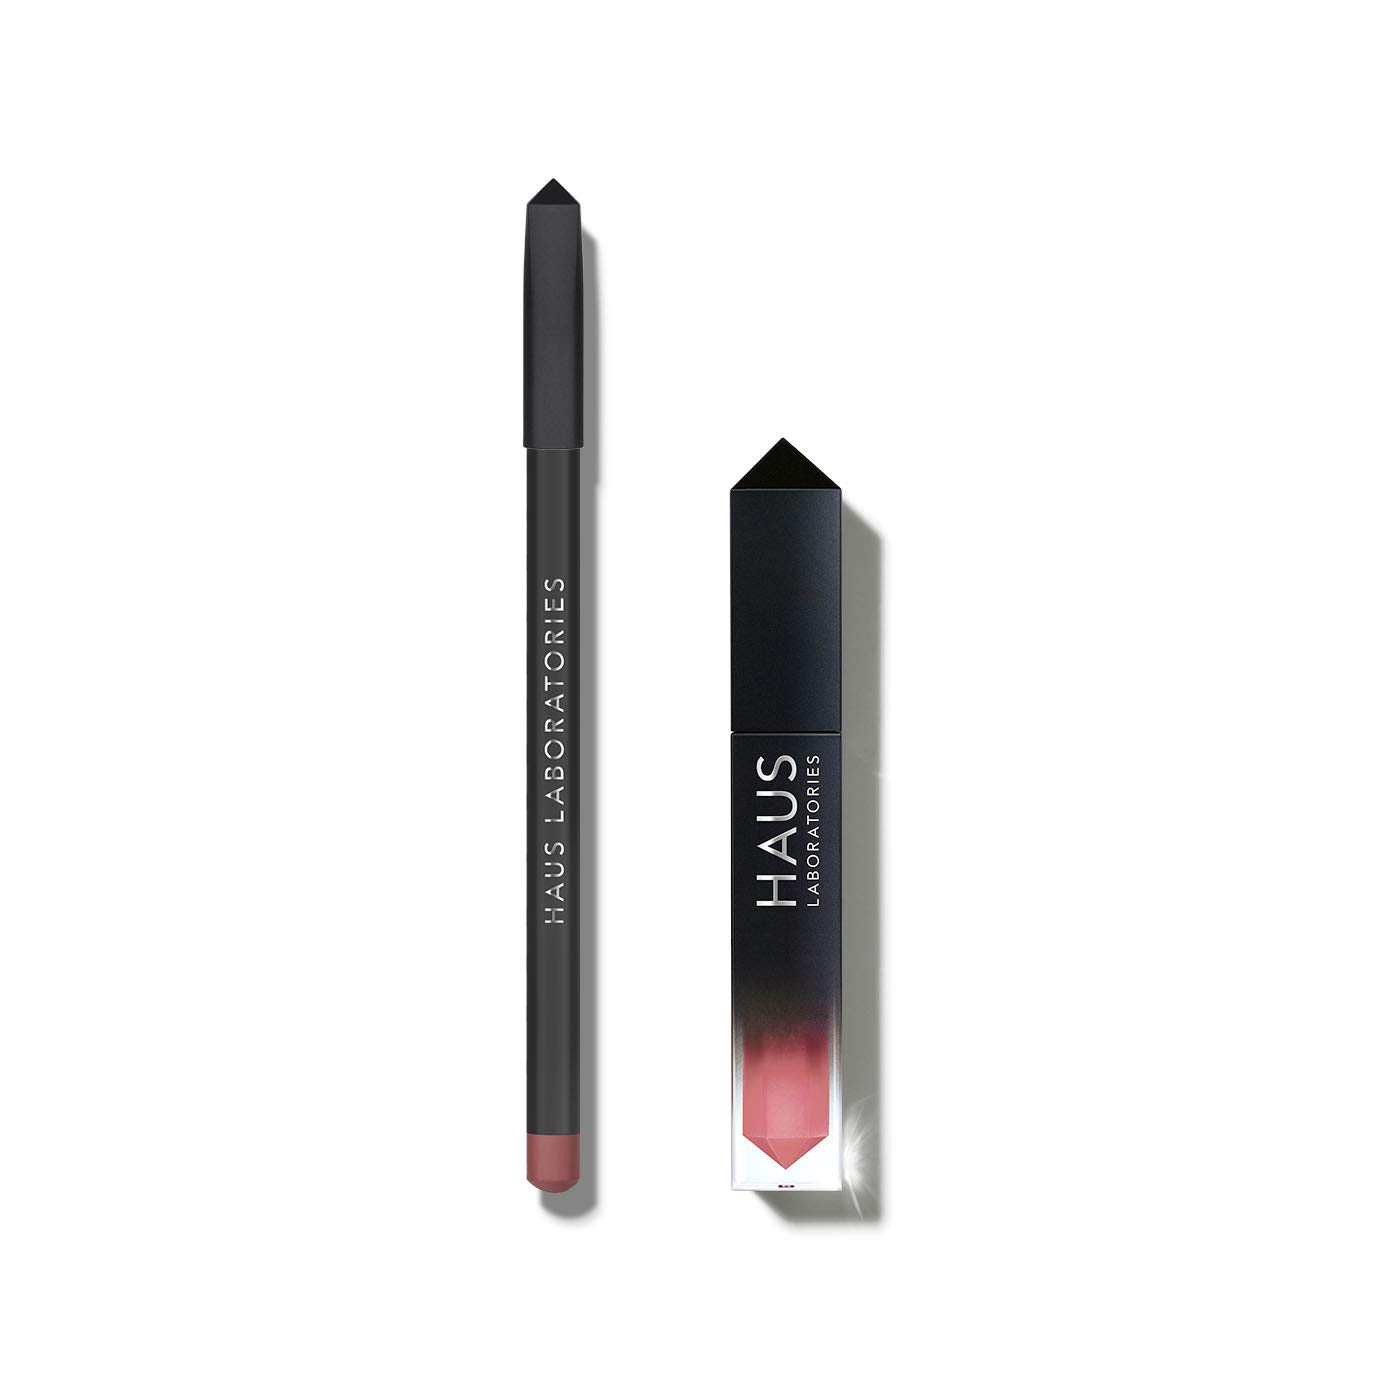 HAUS LABORATORIES by Lady Gaga: LIP SYNC SET | ($34 Value) Lip Gloss & Lip Liner Kit, Longwearing High-Shine and Matte Duo Available in 6 Colors, Vegan & Cruelty-Free | 2-Piece Value Set